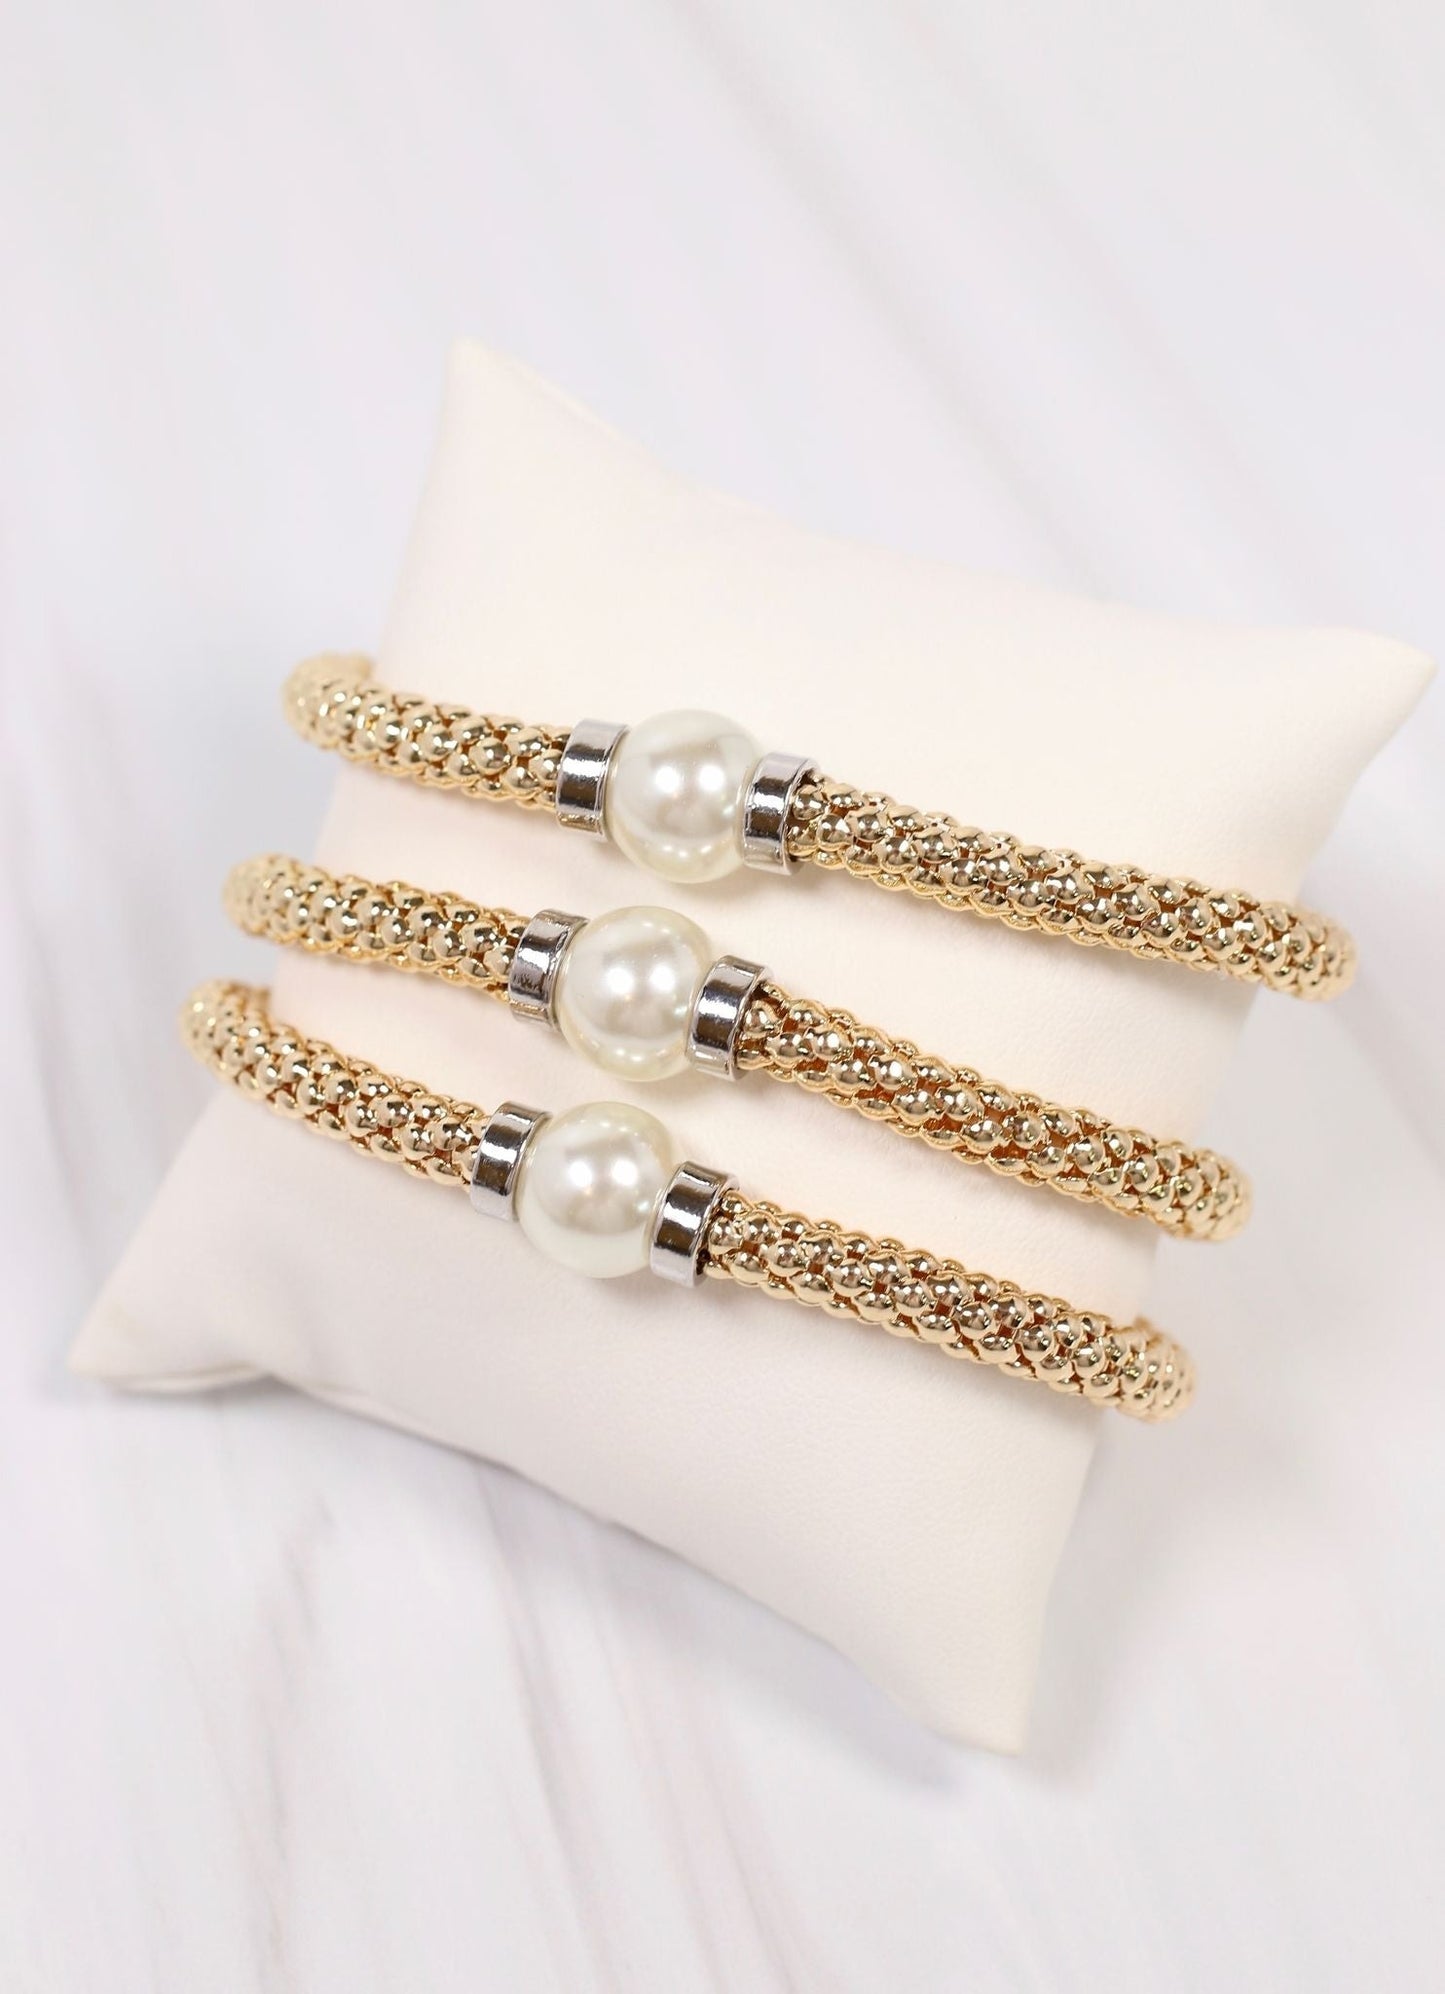 Bracelet Gold with Pearl Set